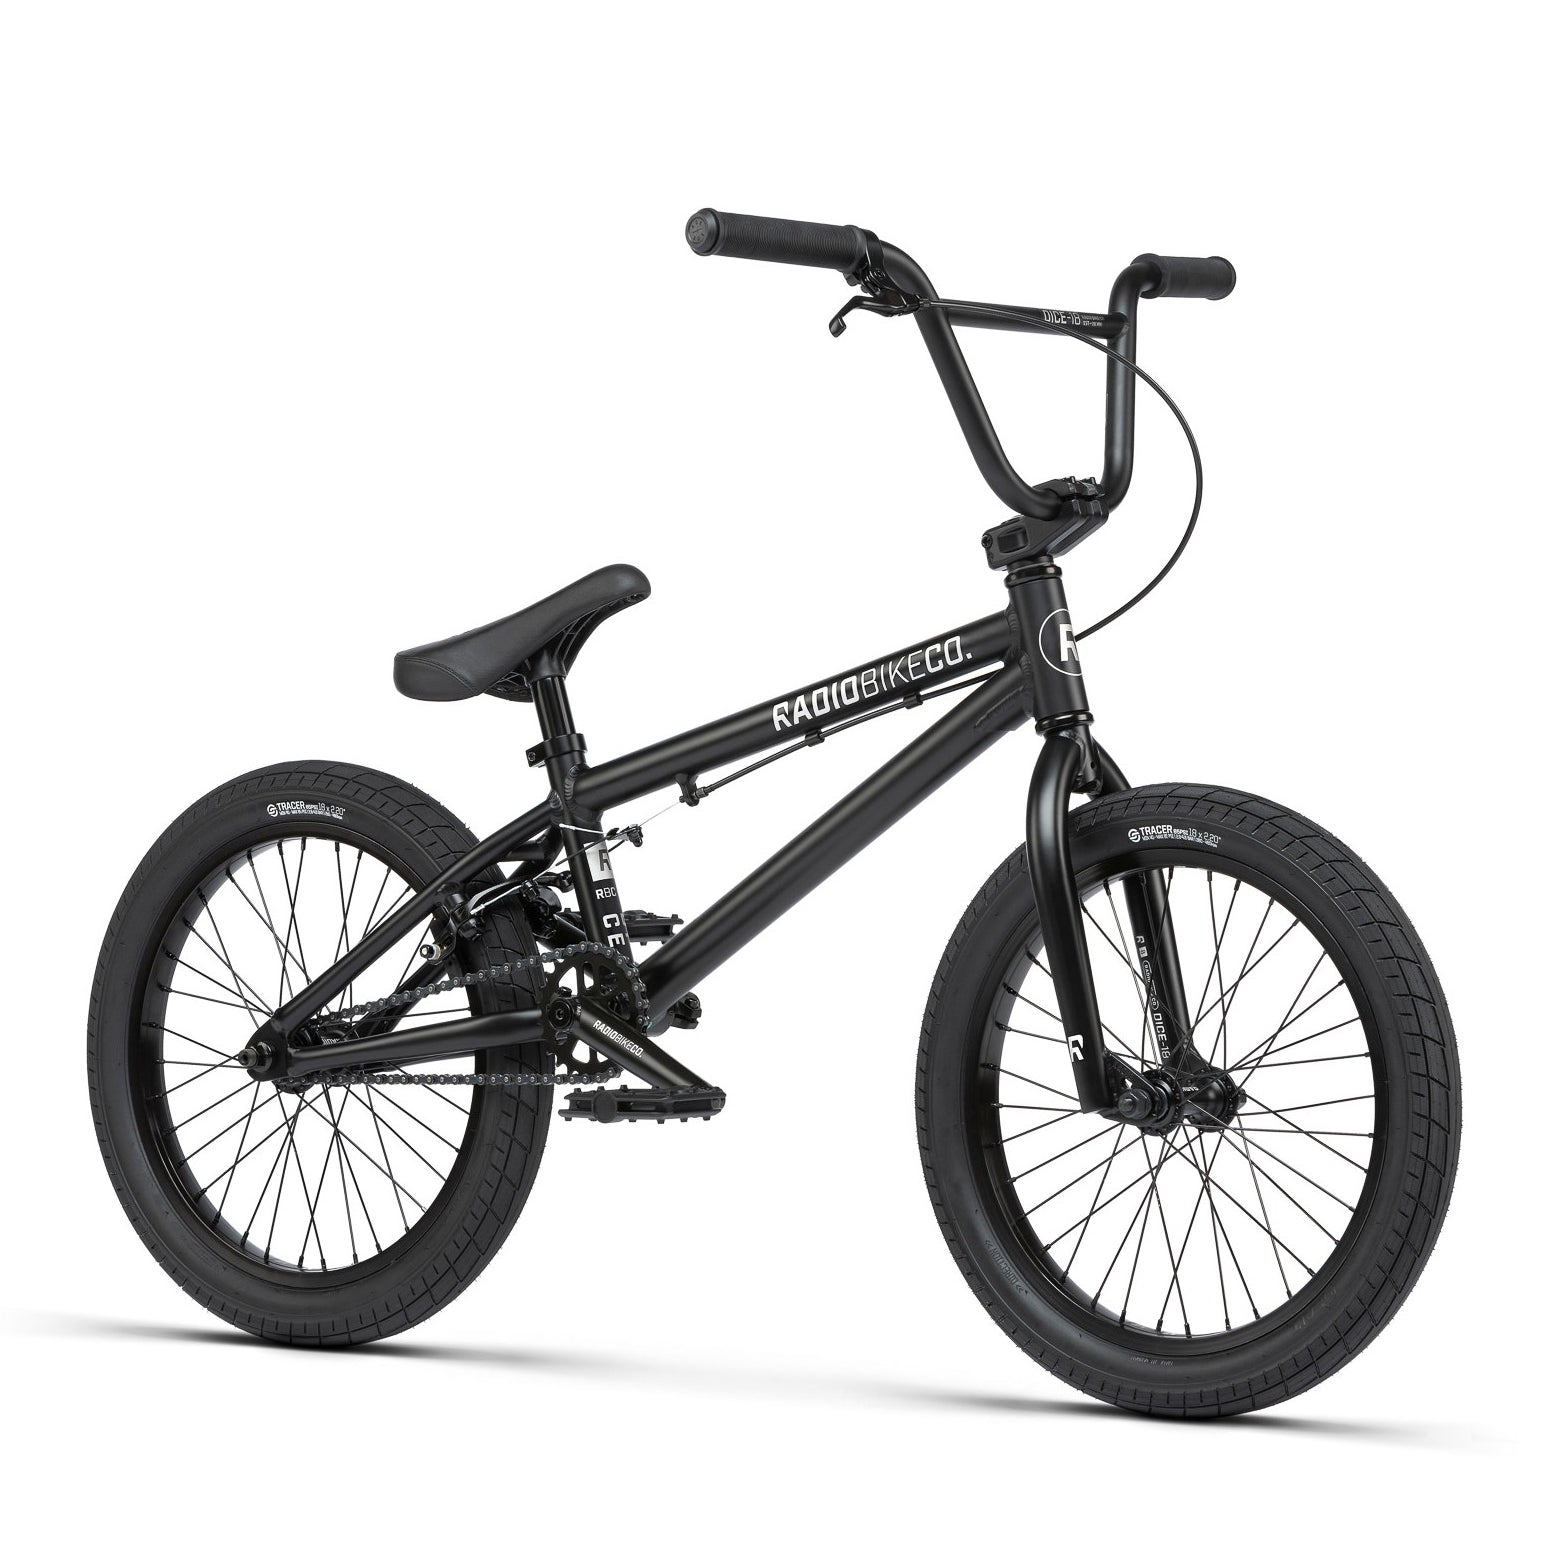 Black Radio Dice 18 Inch Bike with Radio Bike Co. branding, featuring thick Salt Tracer Tyres, three-piece cranks, straight handlebars, and a compact frame designed for stunt riding.